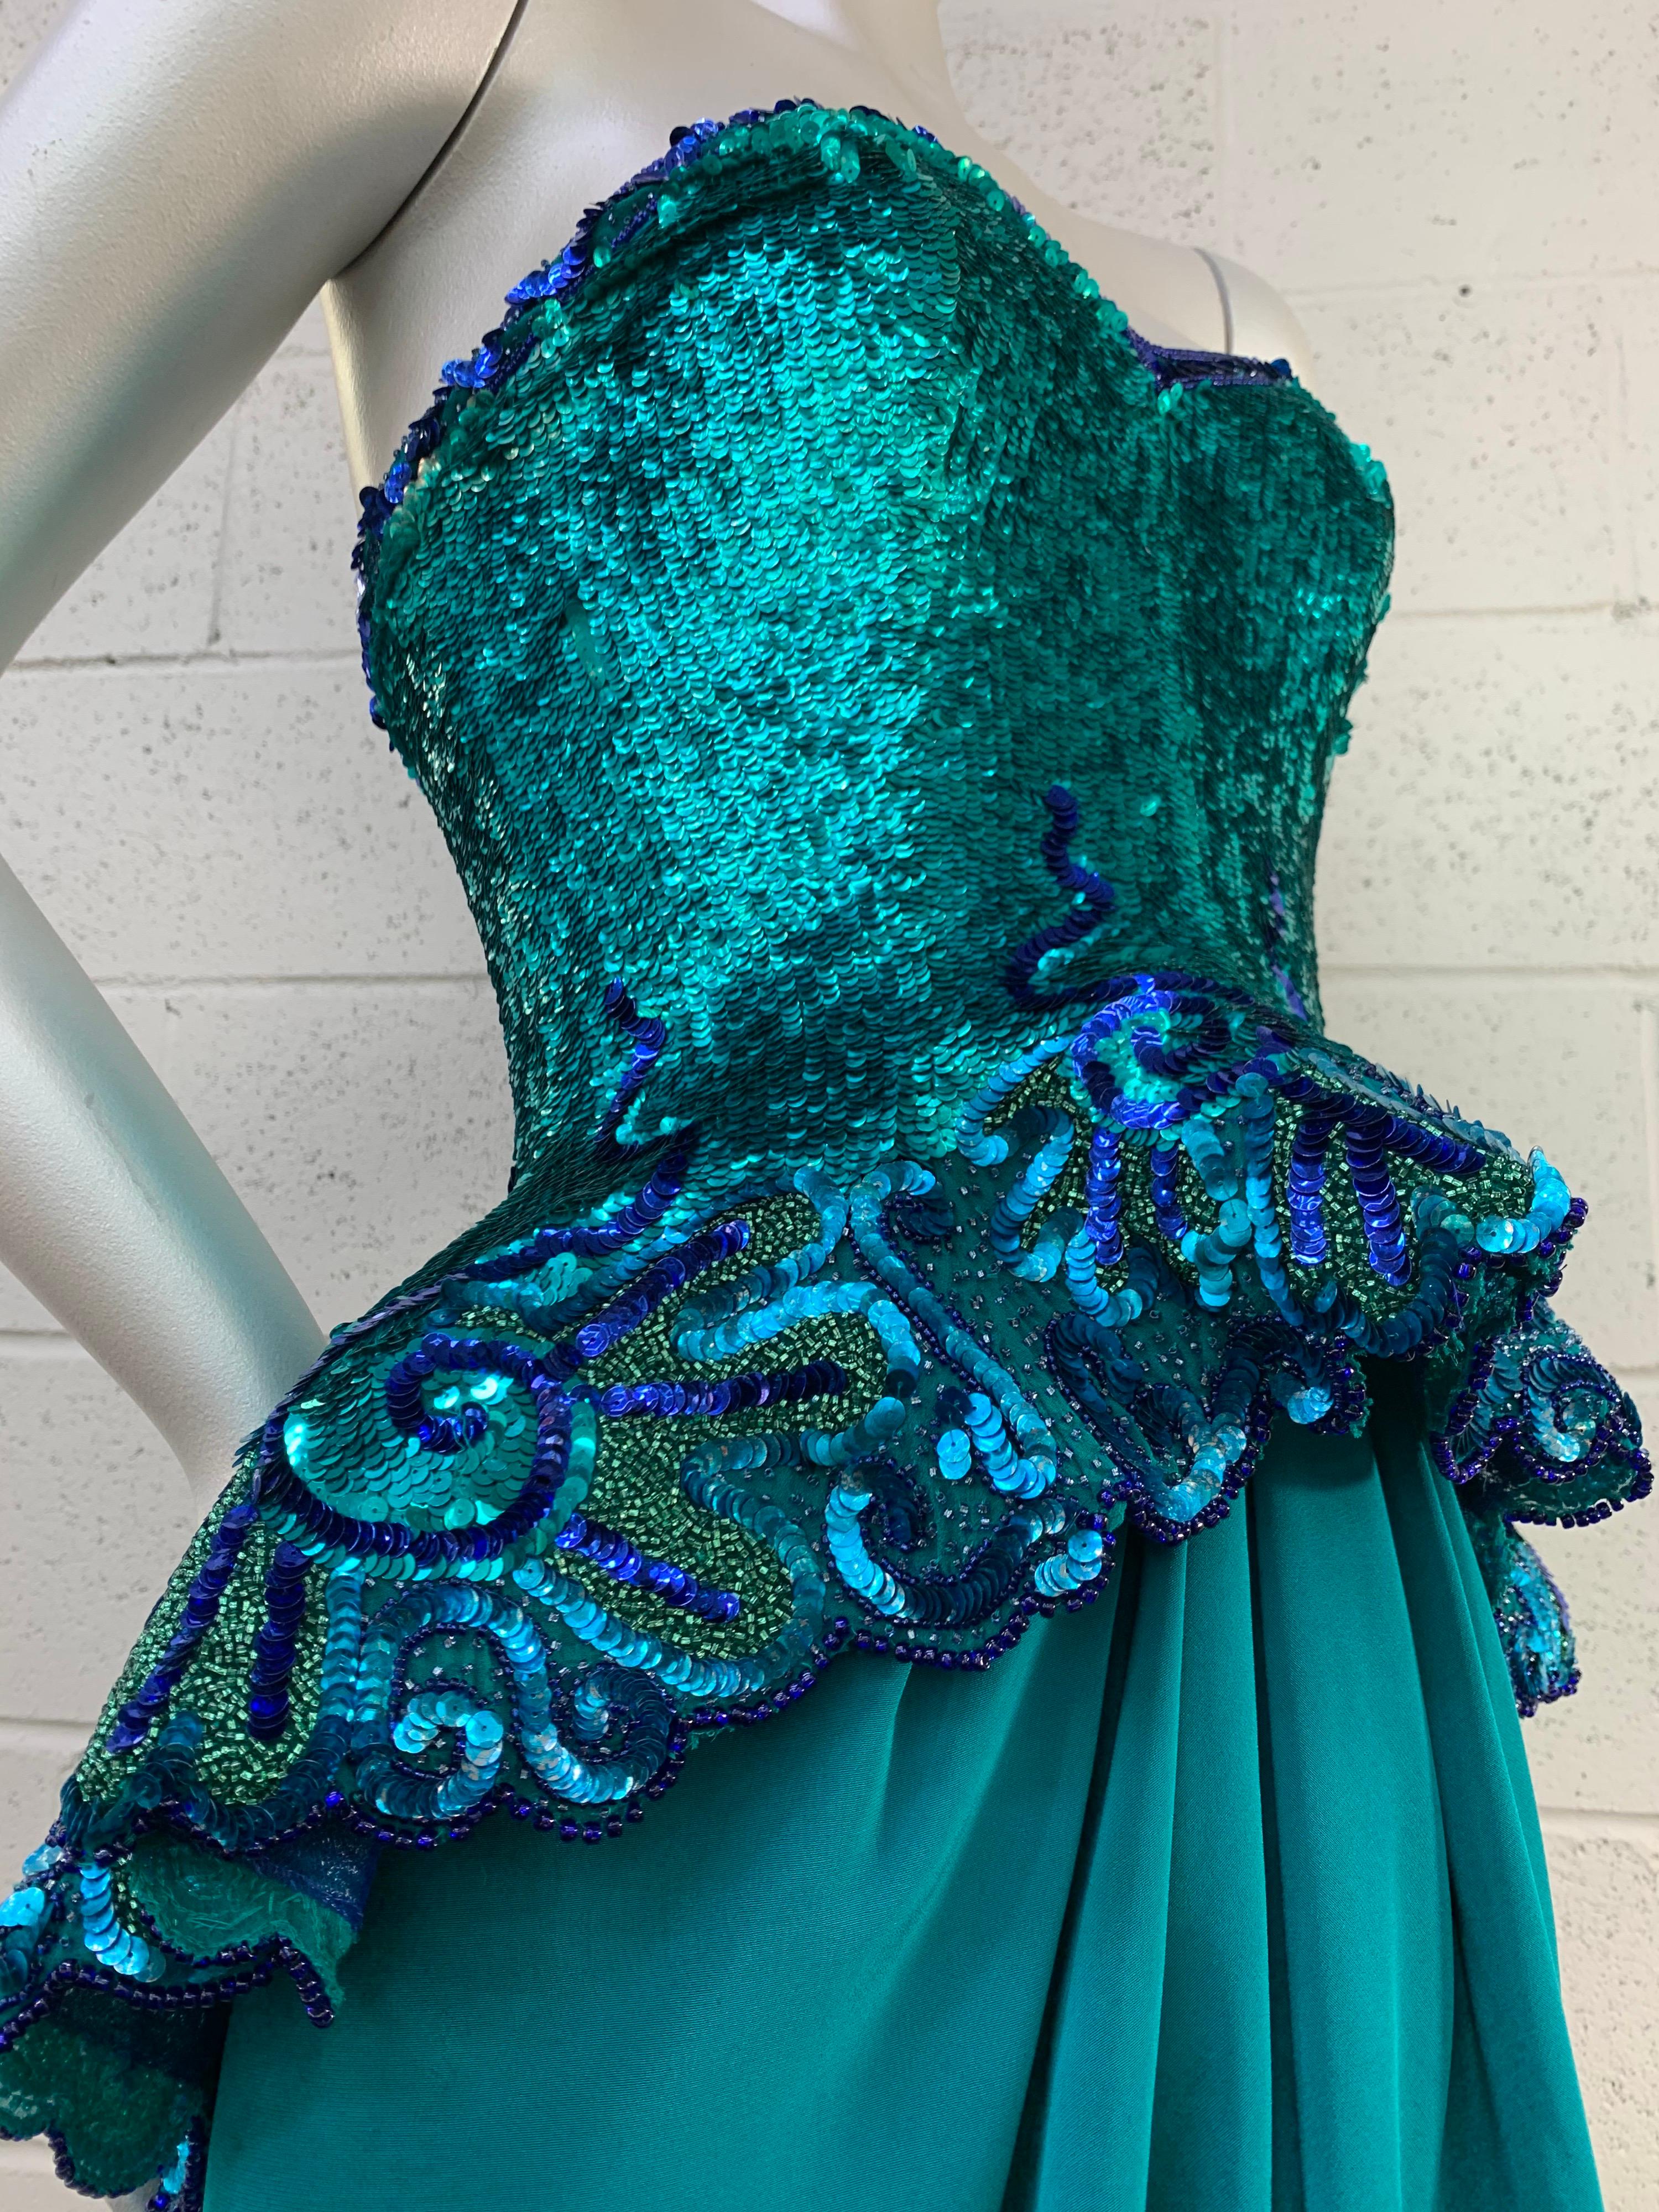 A spectacular 1980s Fabrice Simon lagoon blue sequin and satin strapless gown with voluminous peplum: A vibrant and stunning color palette of sequins and Arabesques flow down this strapless and boned bodice to a pool of draped teal silk satin in